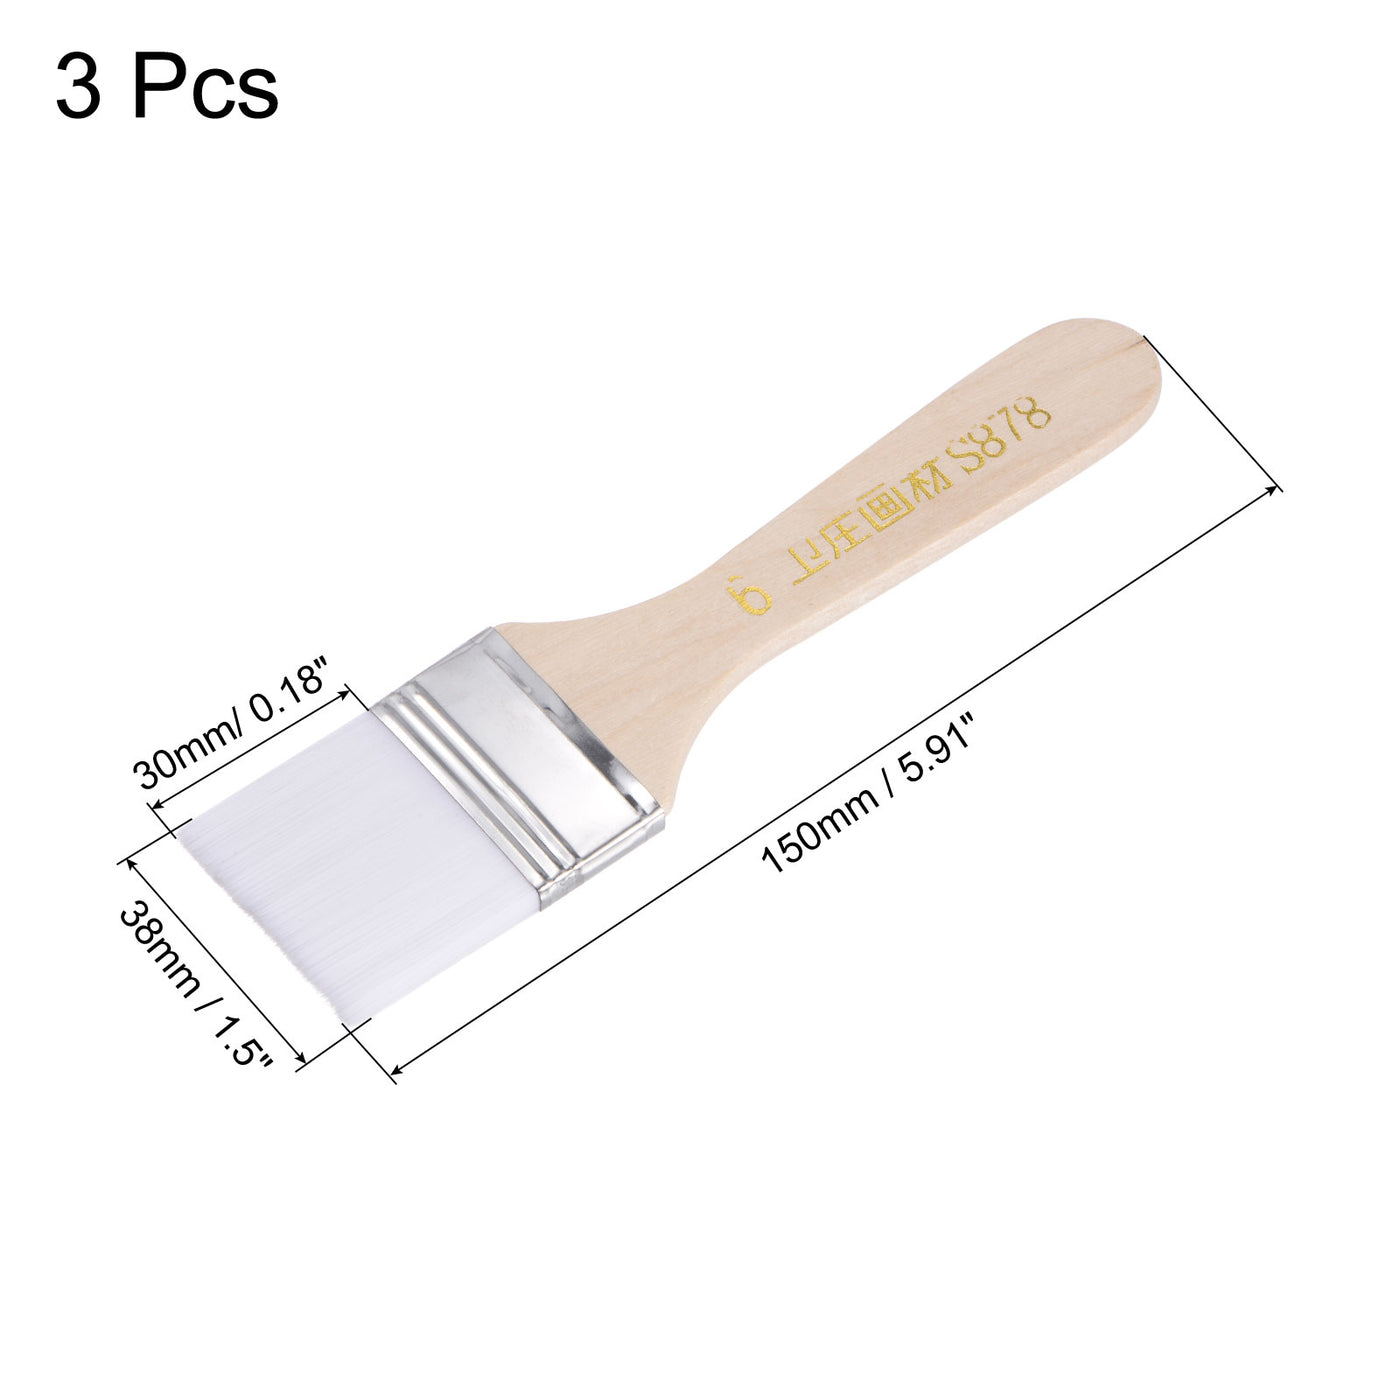 uxcell Uxcell 1.5" Width Small Paint Brush Nylon Bristle with Wood Handle Tool, White 3Pcs